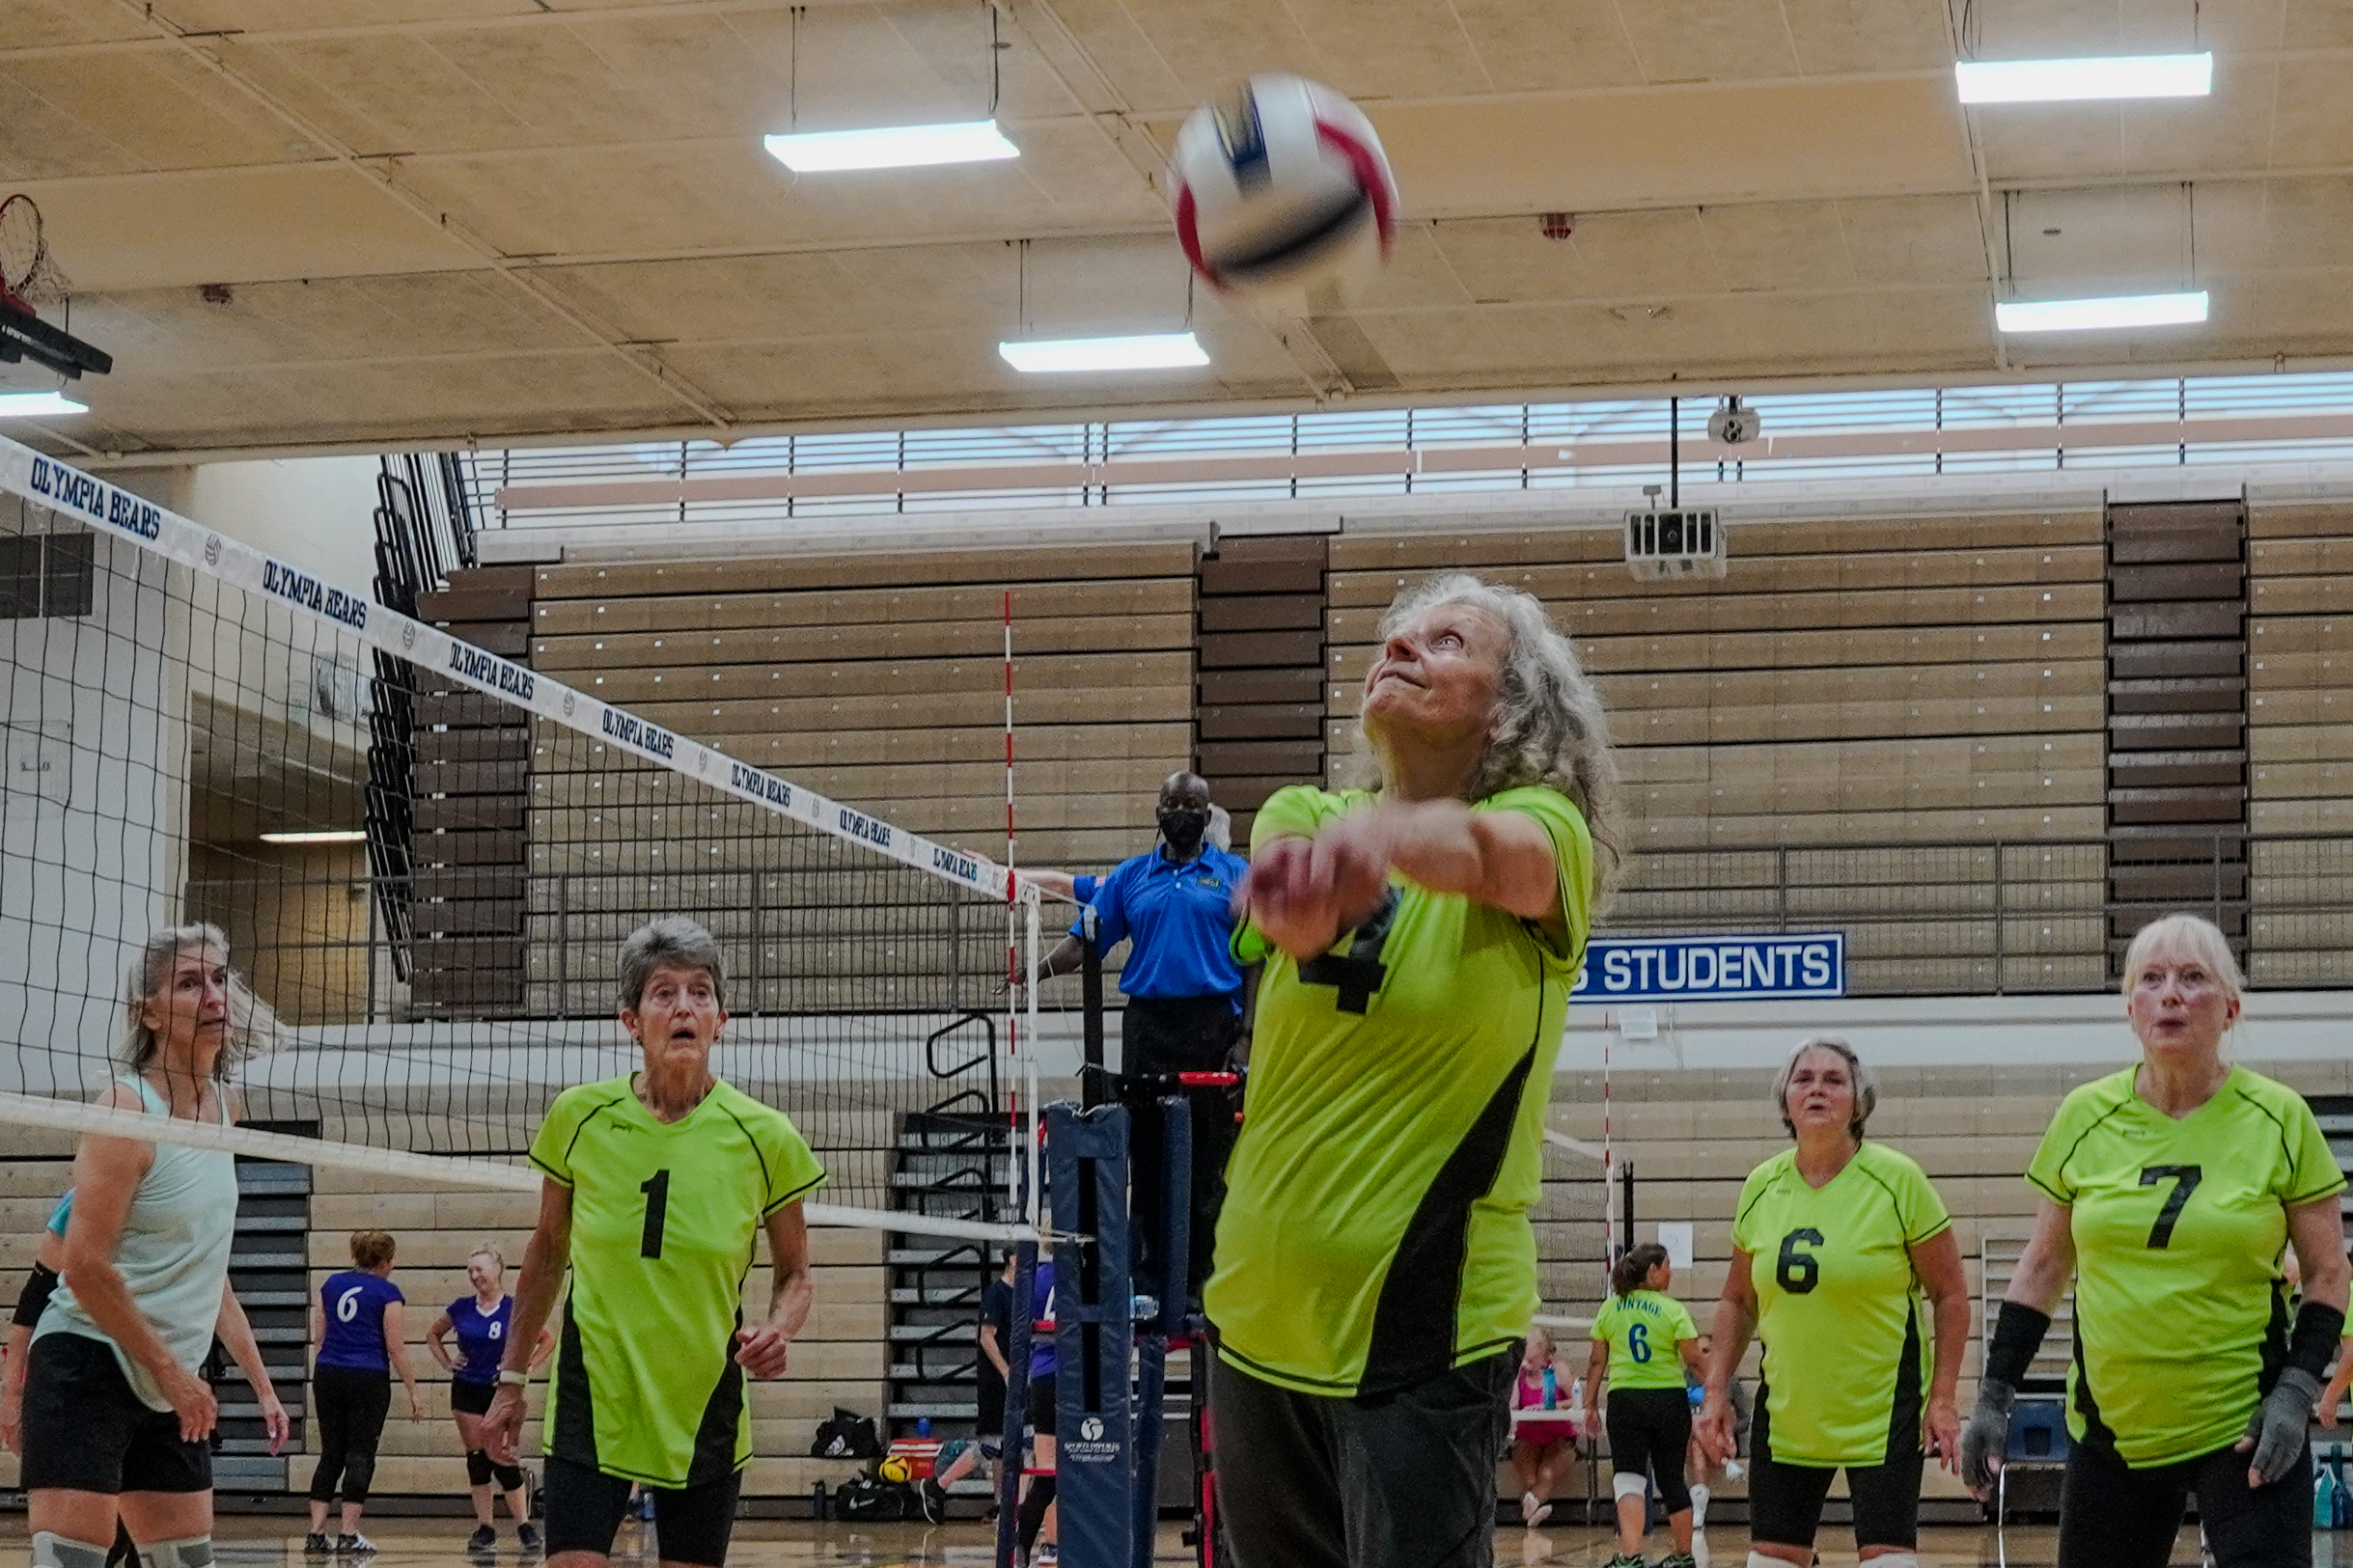 Photos from the Indoor Volleyball Tournament (women) on July 23rd